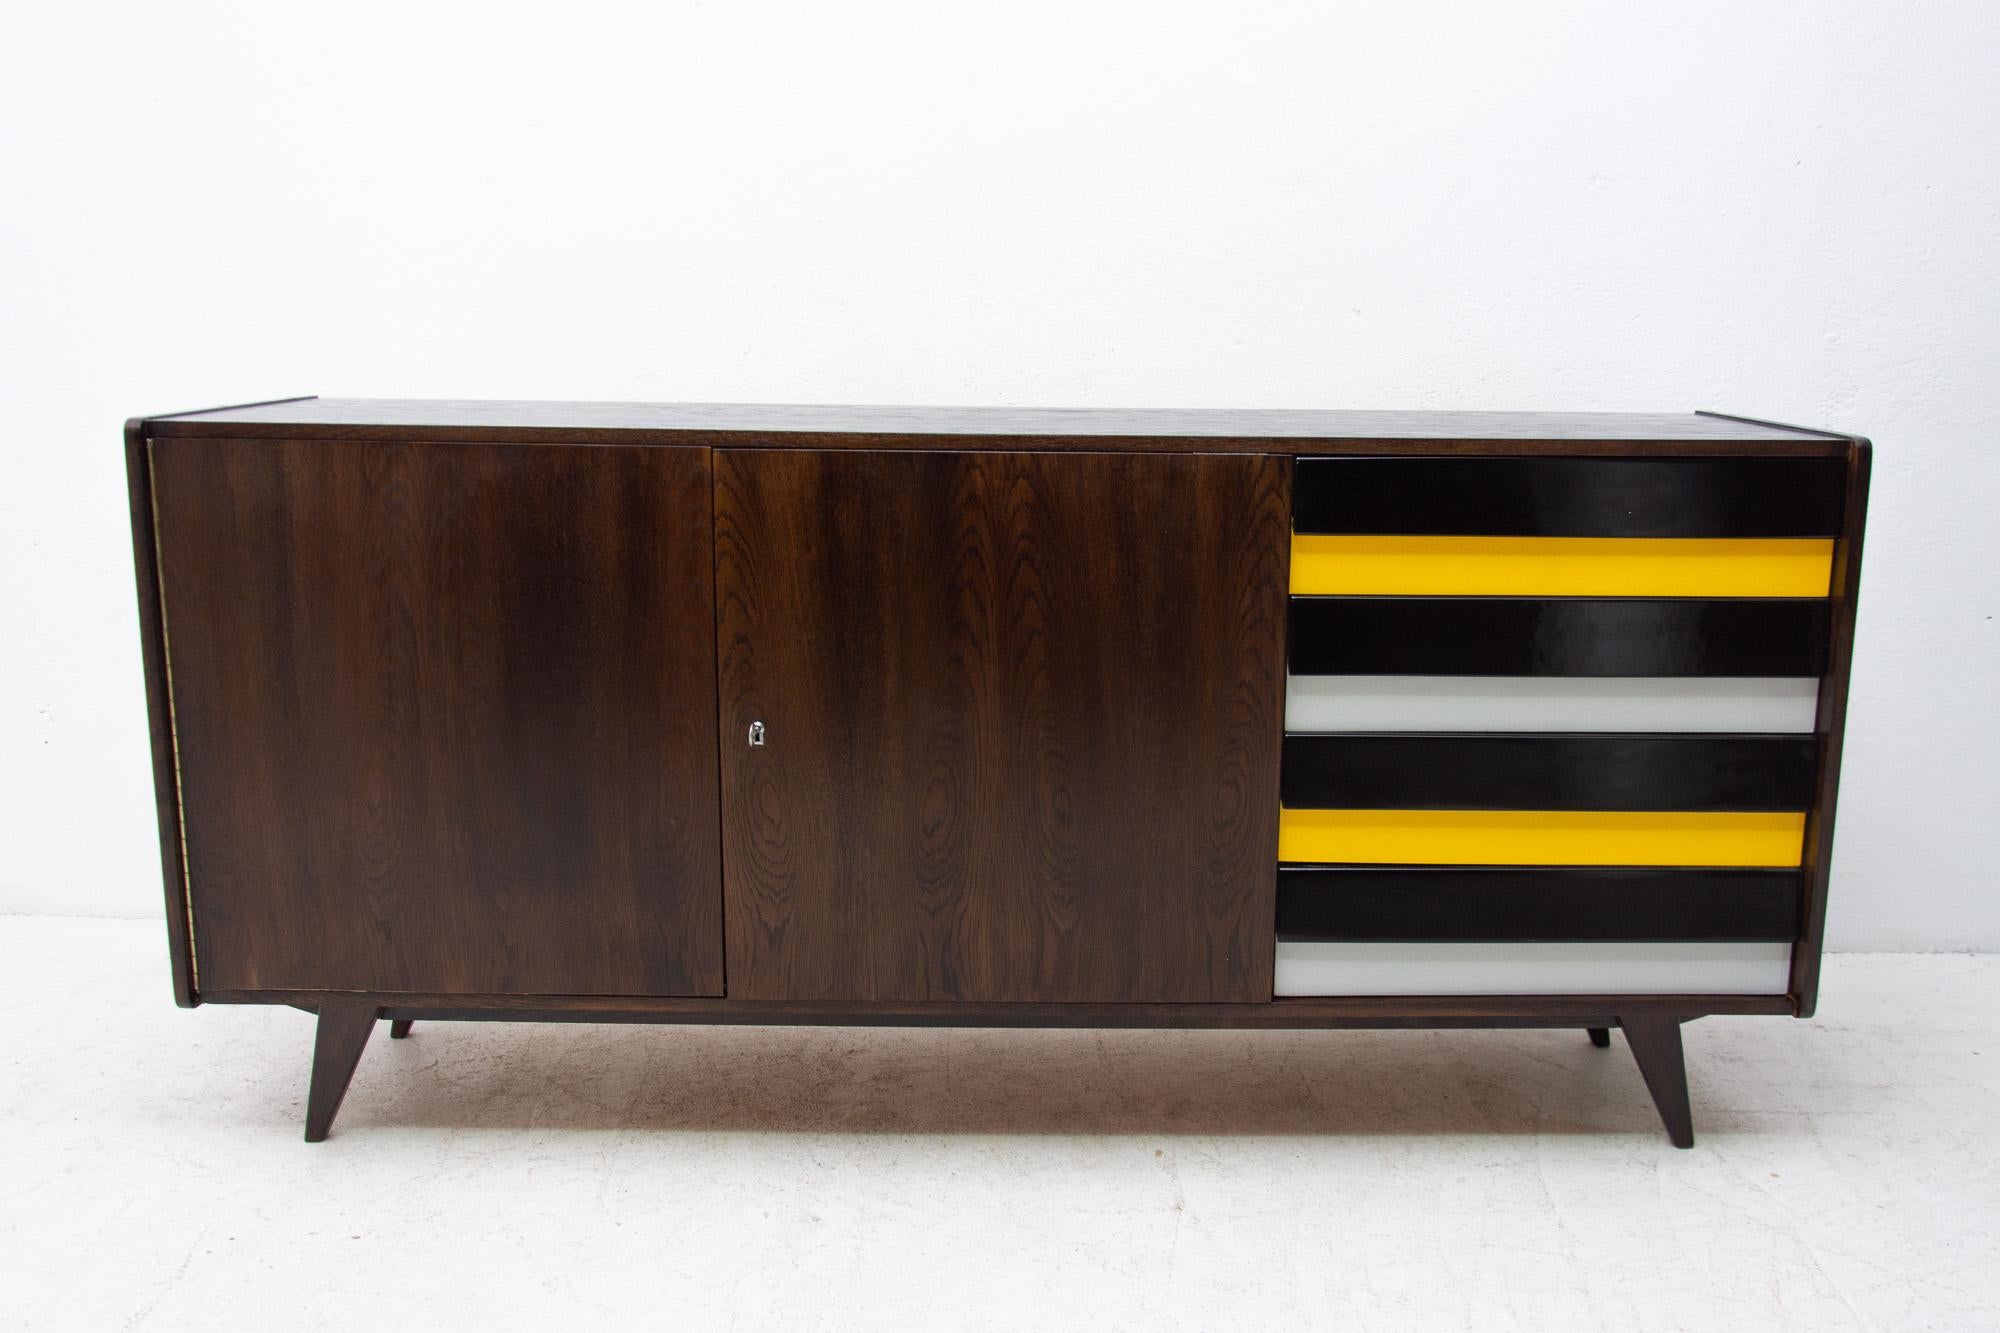 Midcentury sideboard model U-460 designed by Jirí Jiroutek for Interier Praha in the 1960s. It´s made of dark stained oak wood. Features colored lacquered drawers. In excellent condition, fully refurbished.